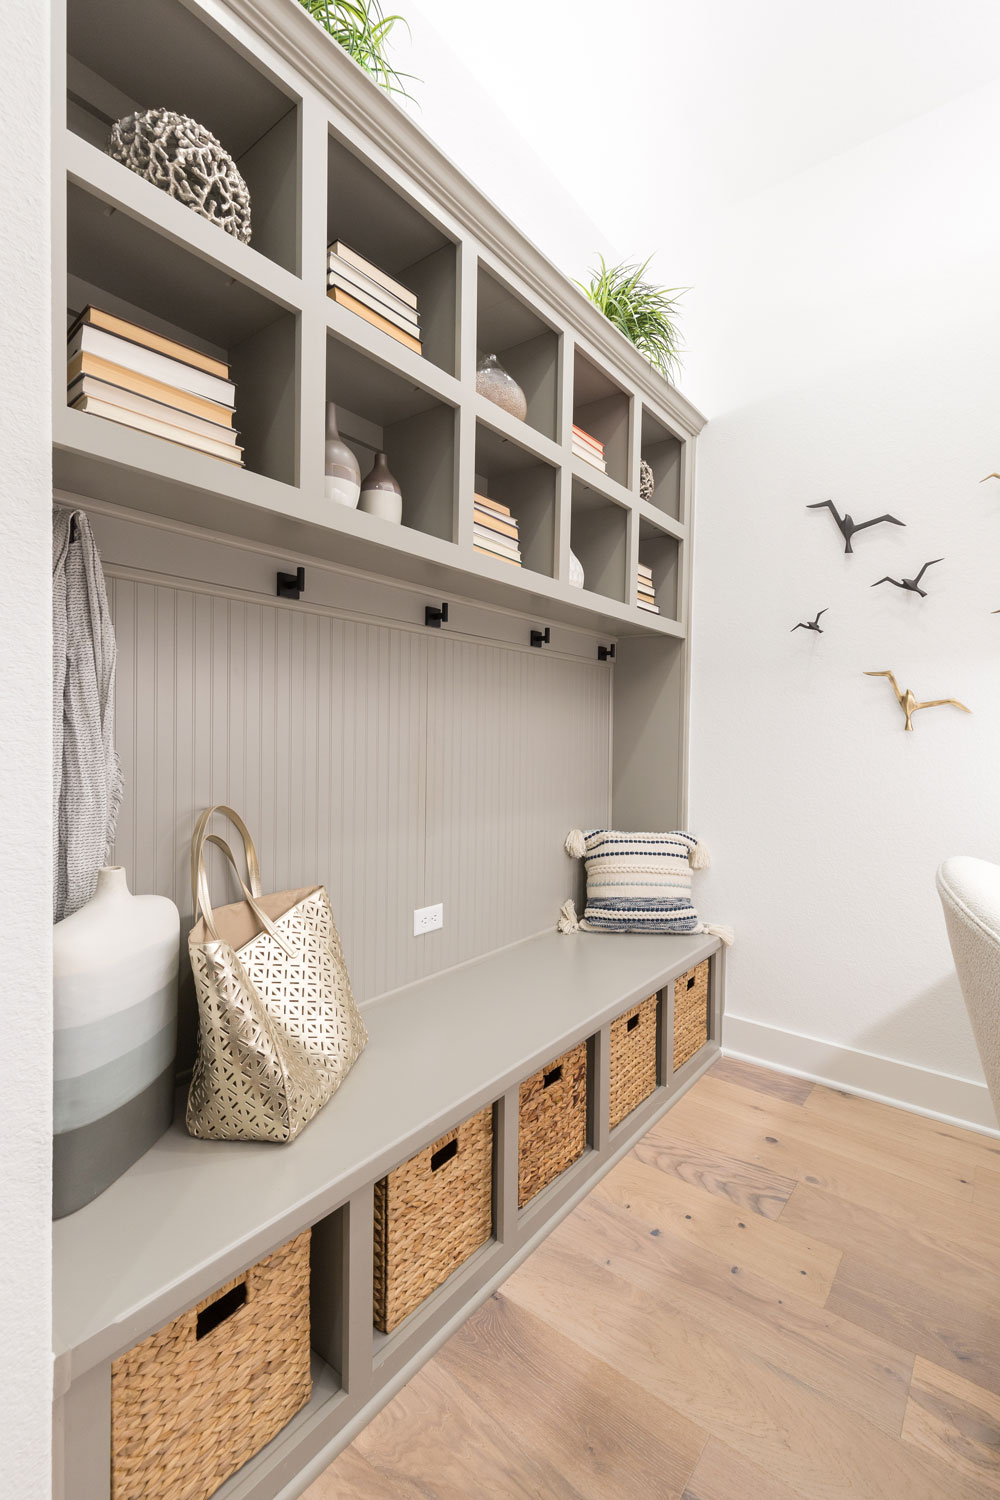 Built-in mud room cabinets with open shelves and upper and lower storage cubbies in gray paint